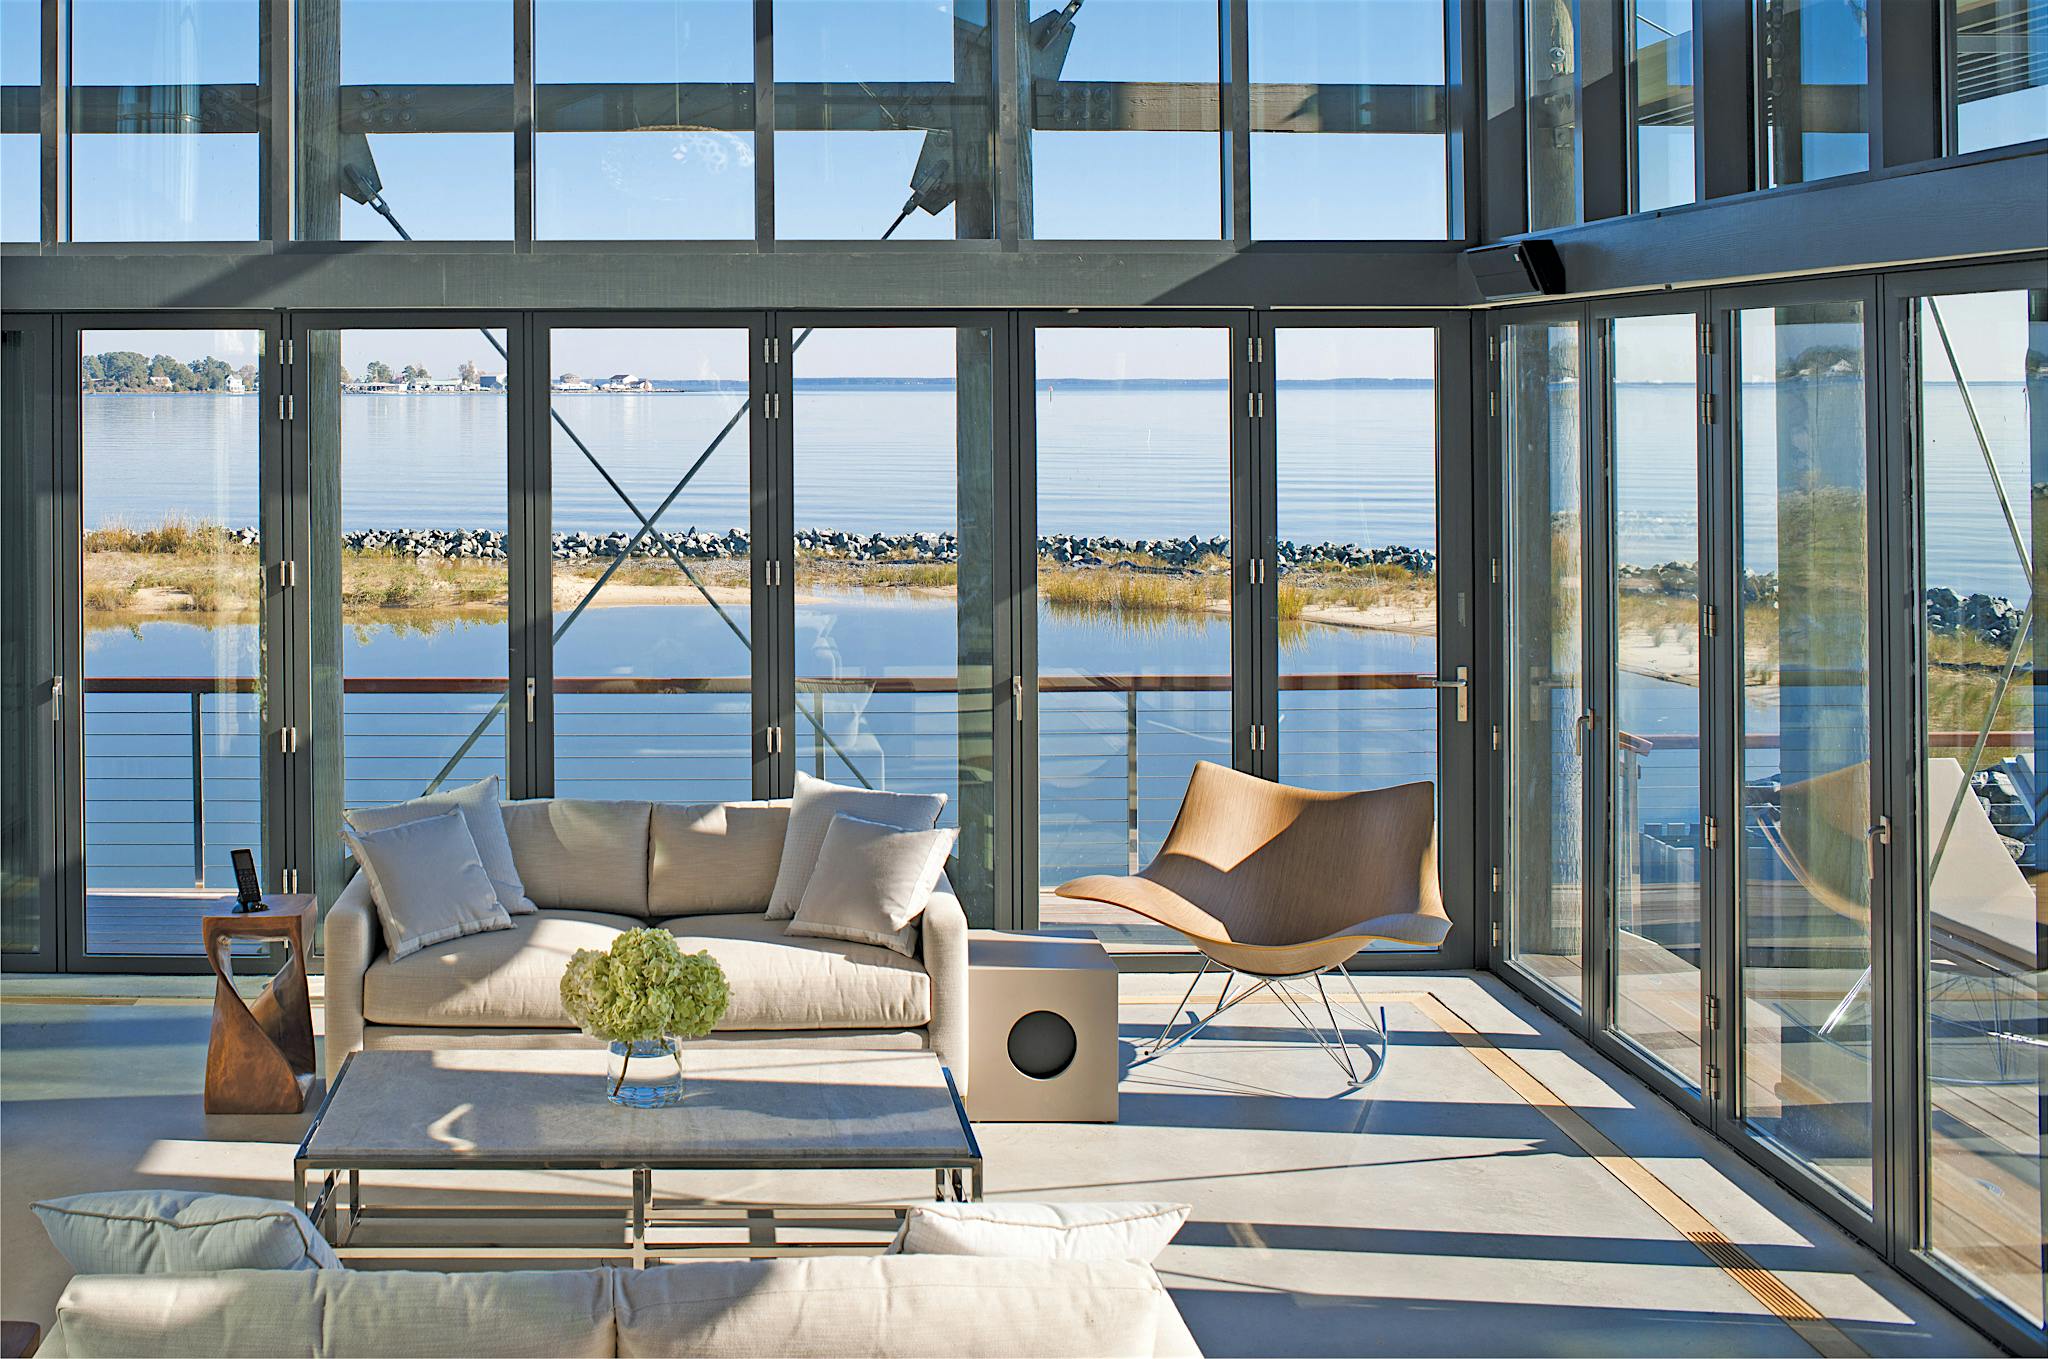 folding glass walls systems in beach house design